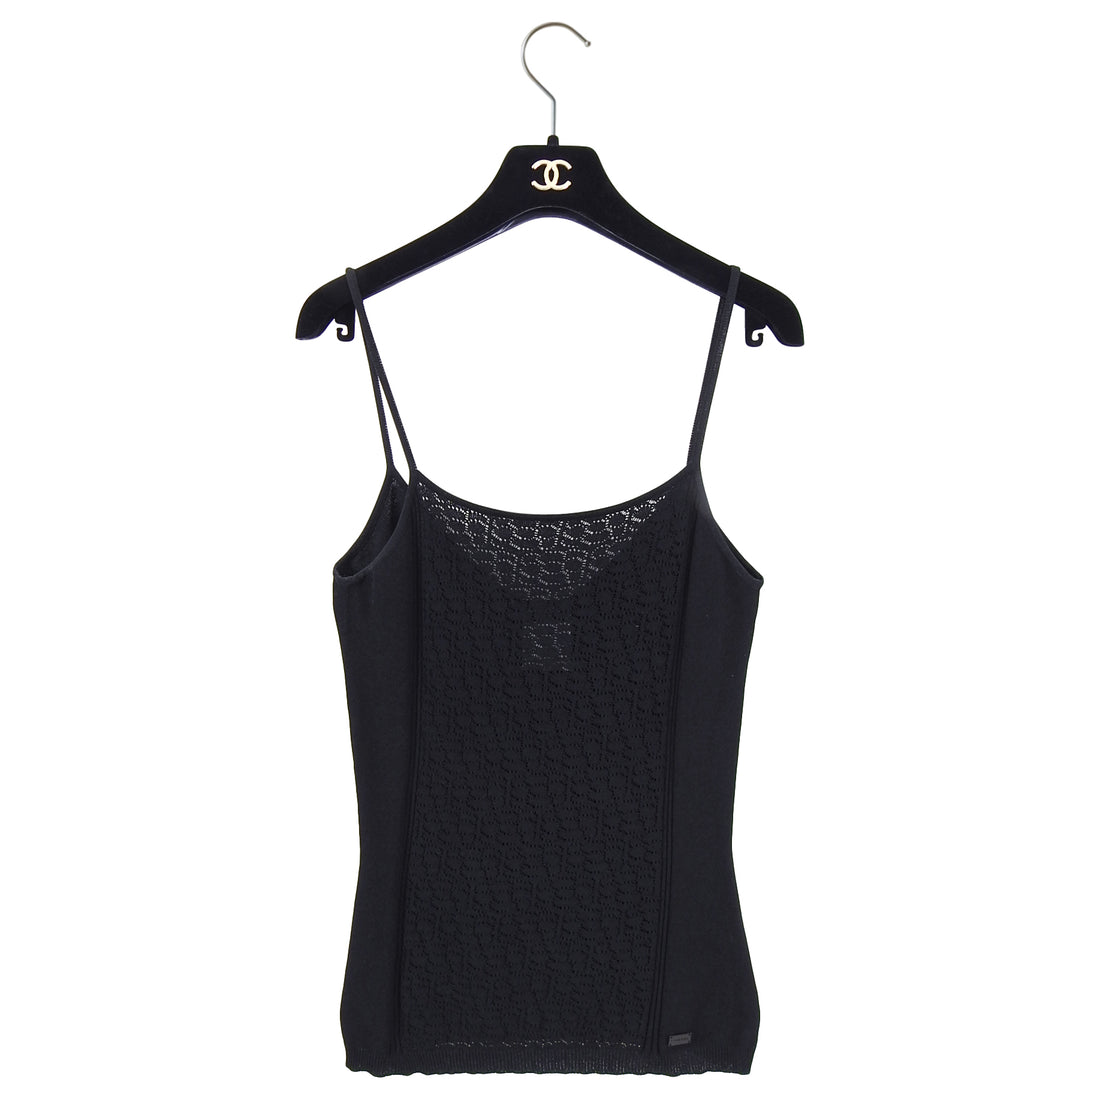 Chanel Vintage 2003 Cruise Black Knit Jersey Strappy Tank Top - 38 / 6